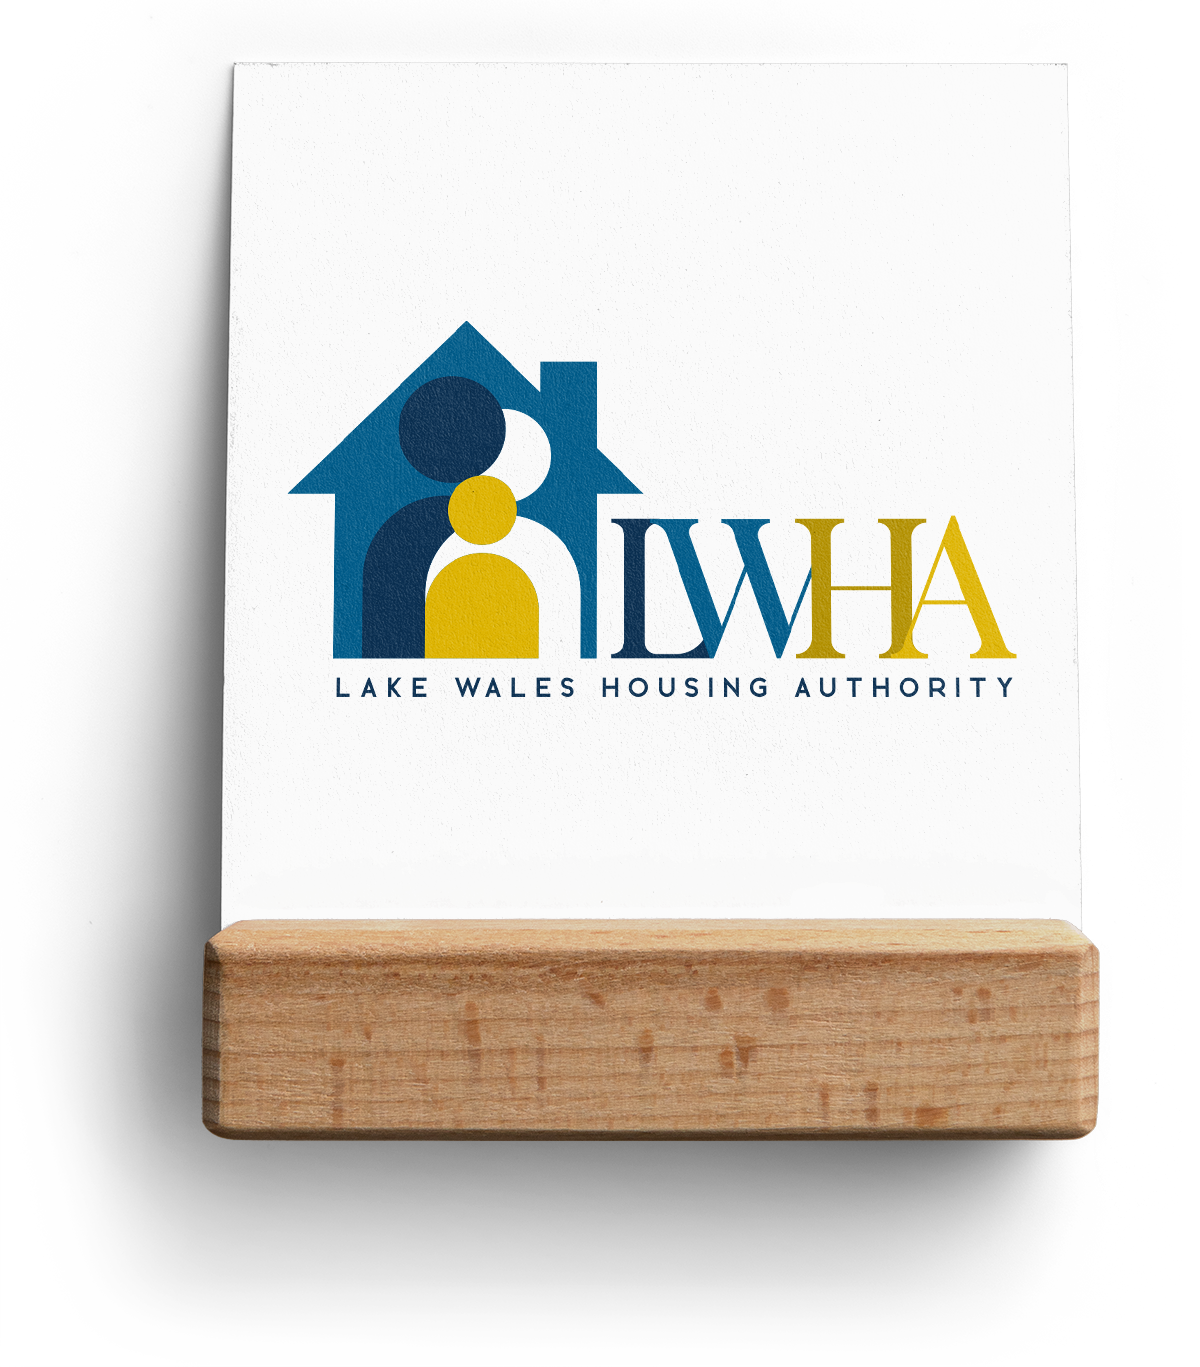 Lake Wales Housing Authority mockup on a card.